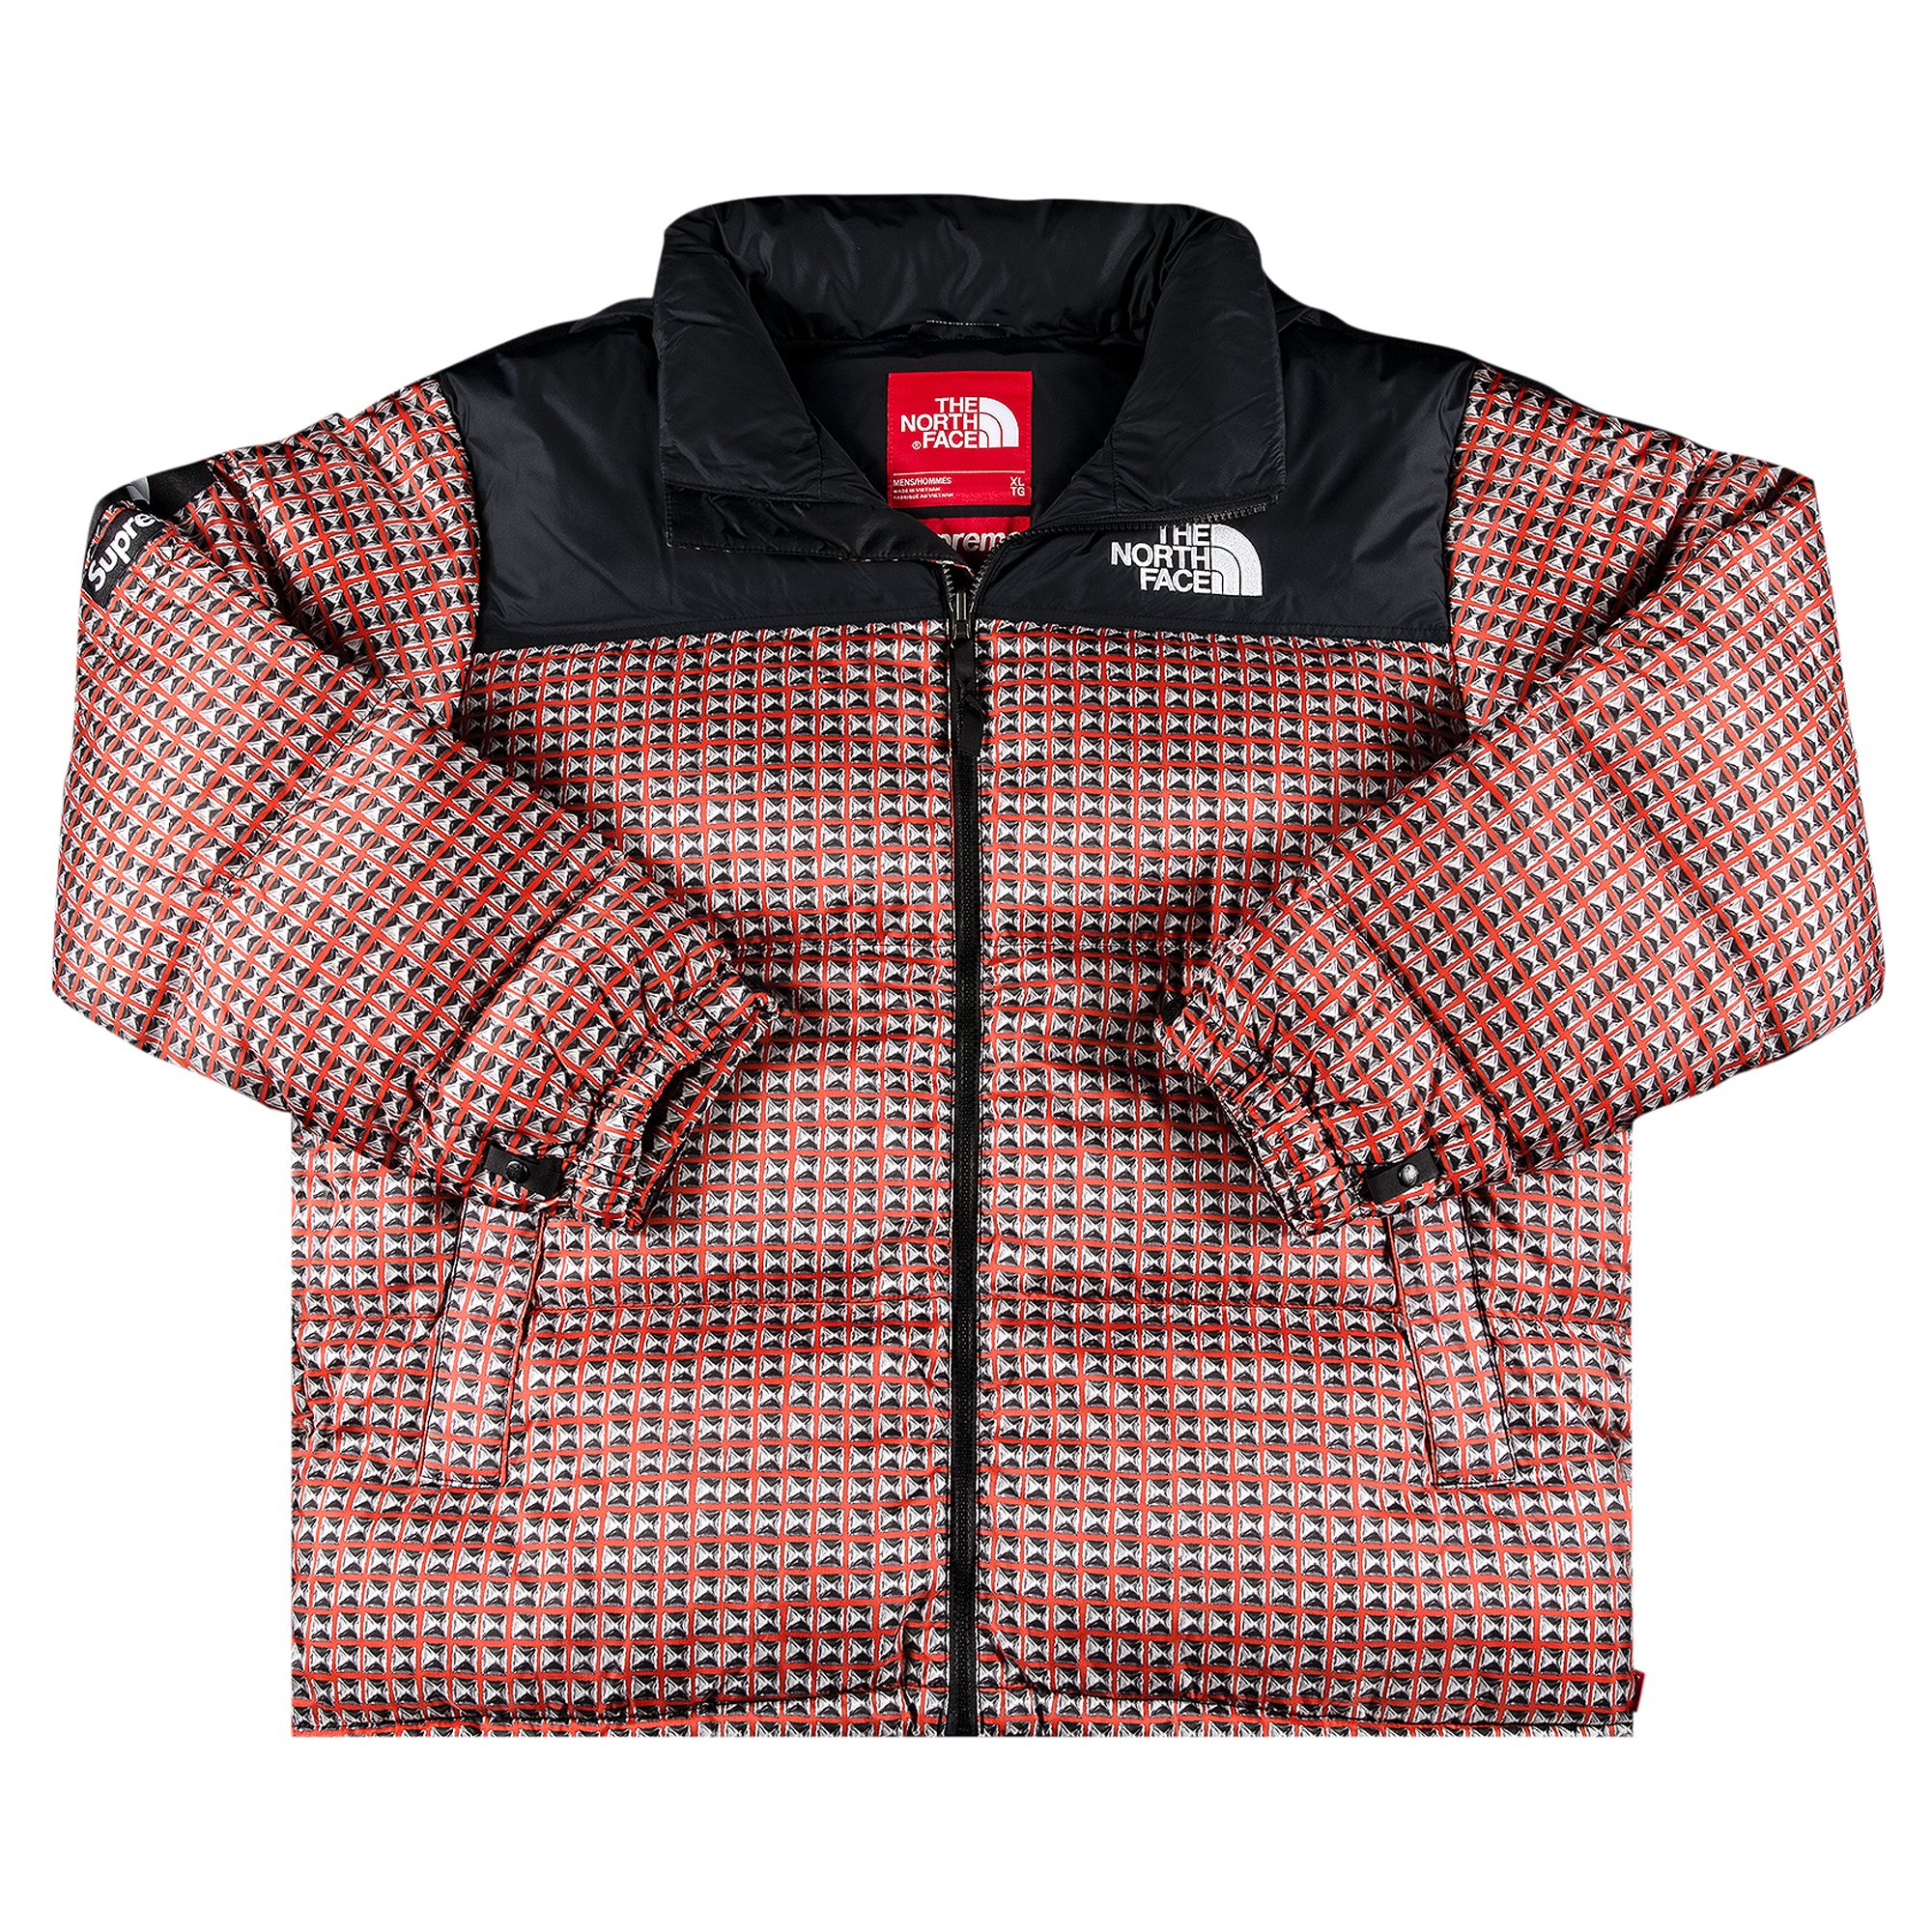 Supreme x The North Face Studded Nuptse Jacket 'Red' | GOAT